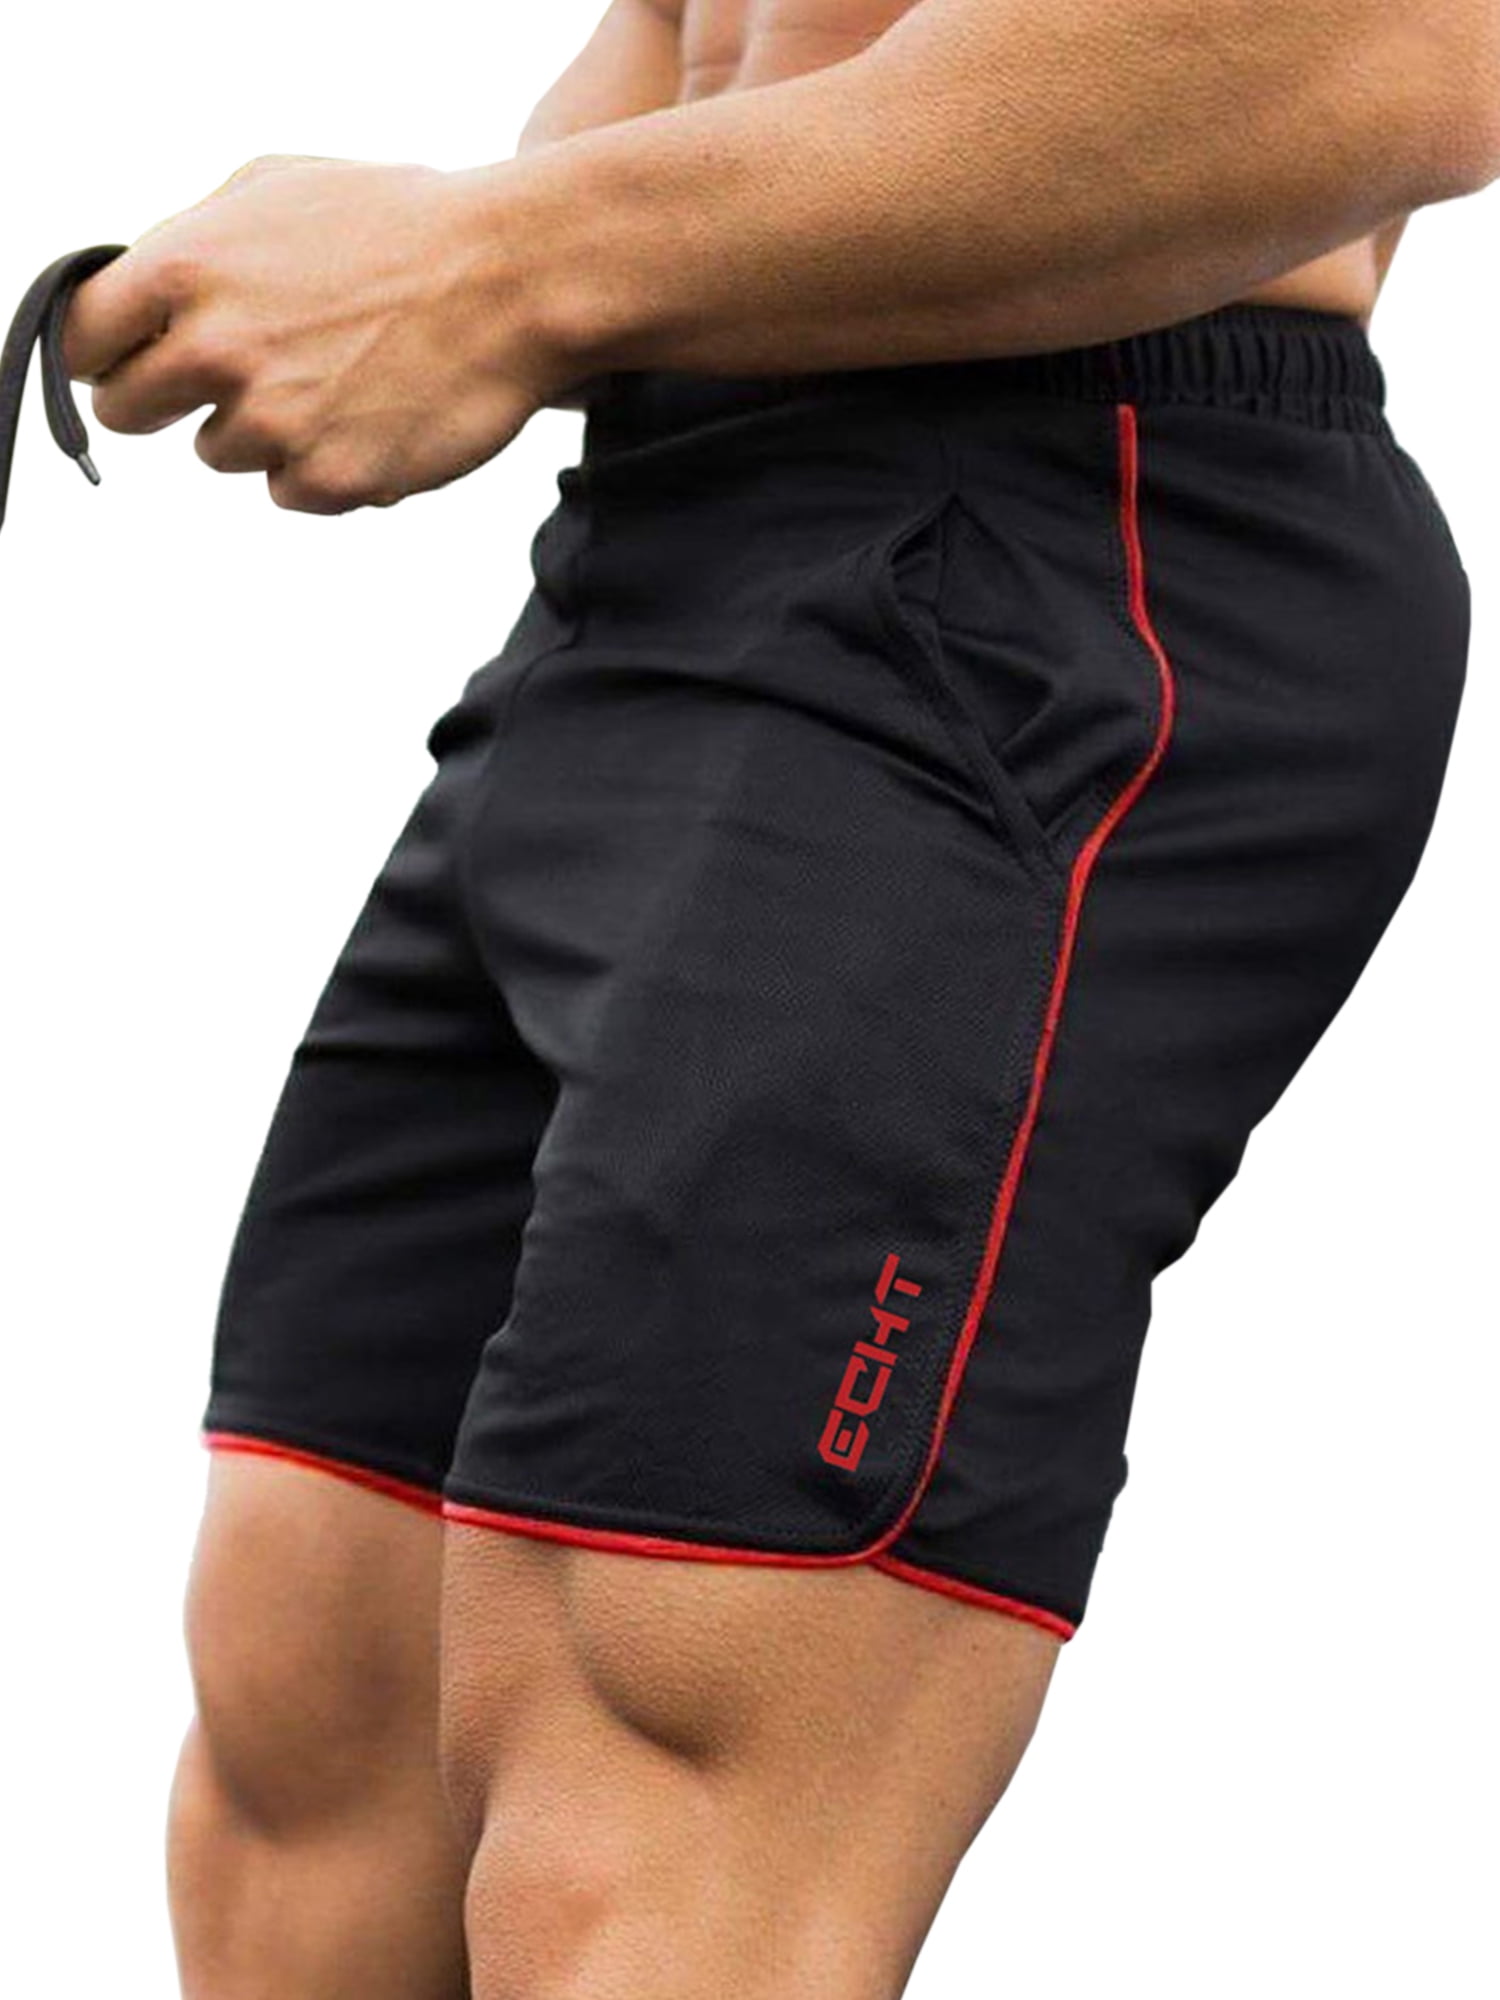 Men's Jogging Running Sports Shorts Breathable Gym Training Fitness Pants Beach